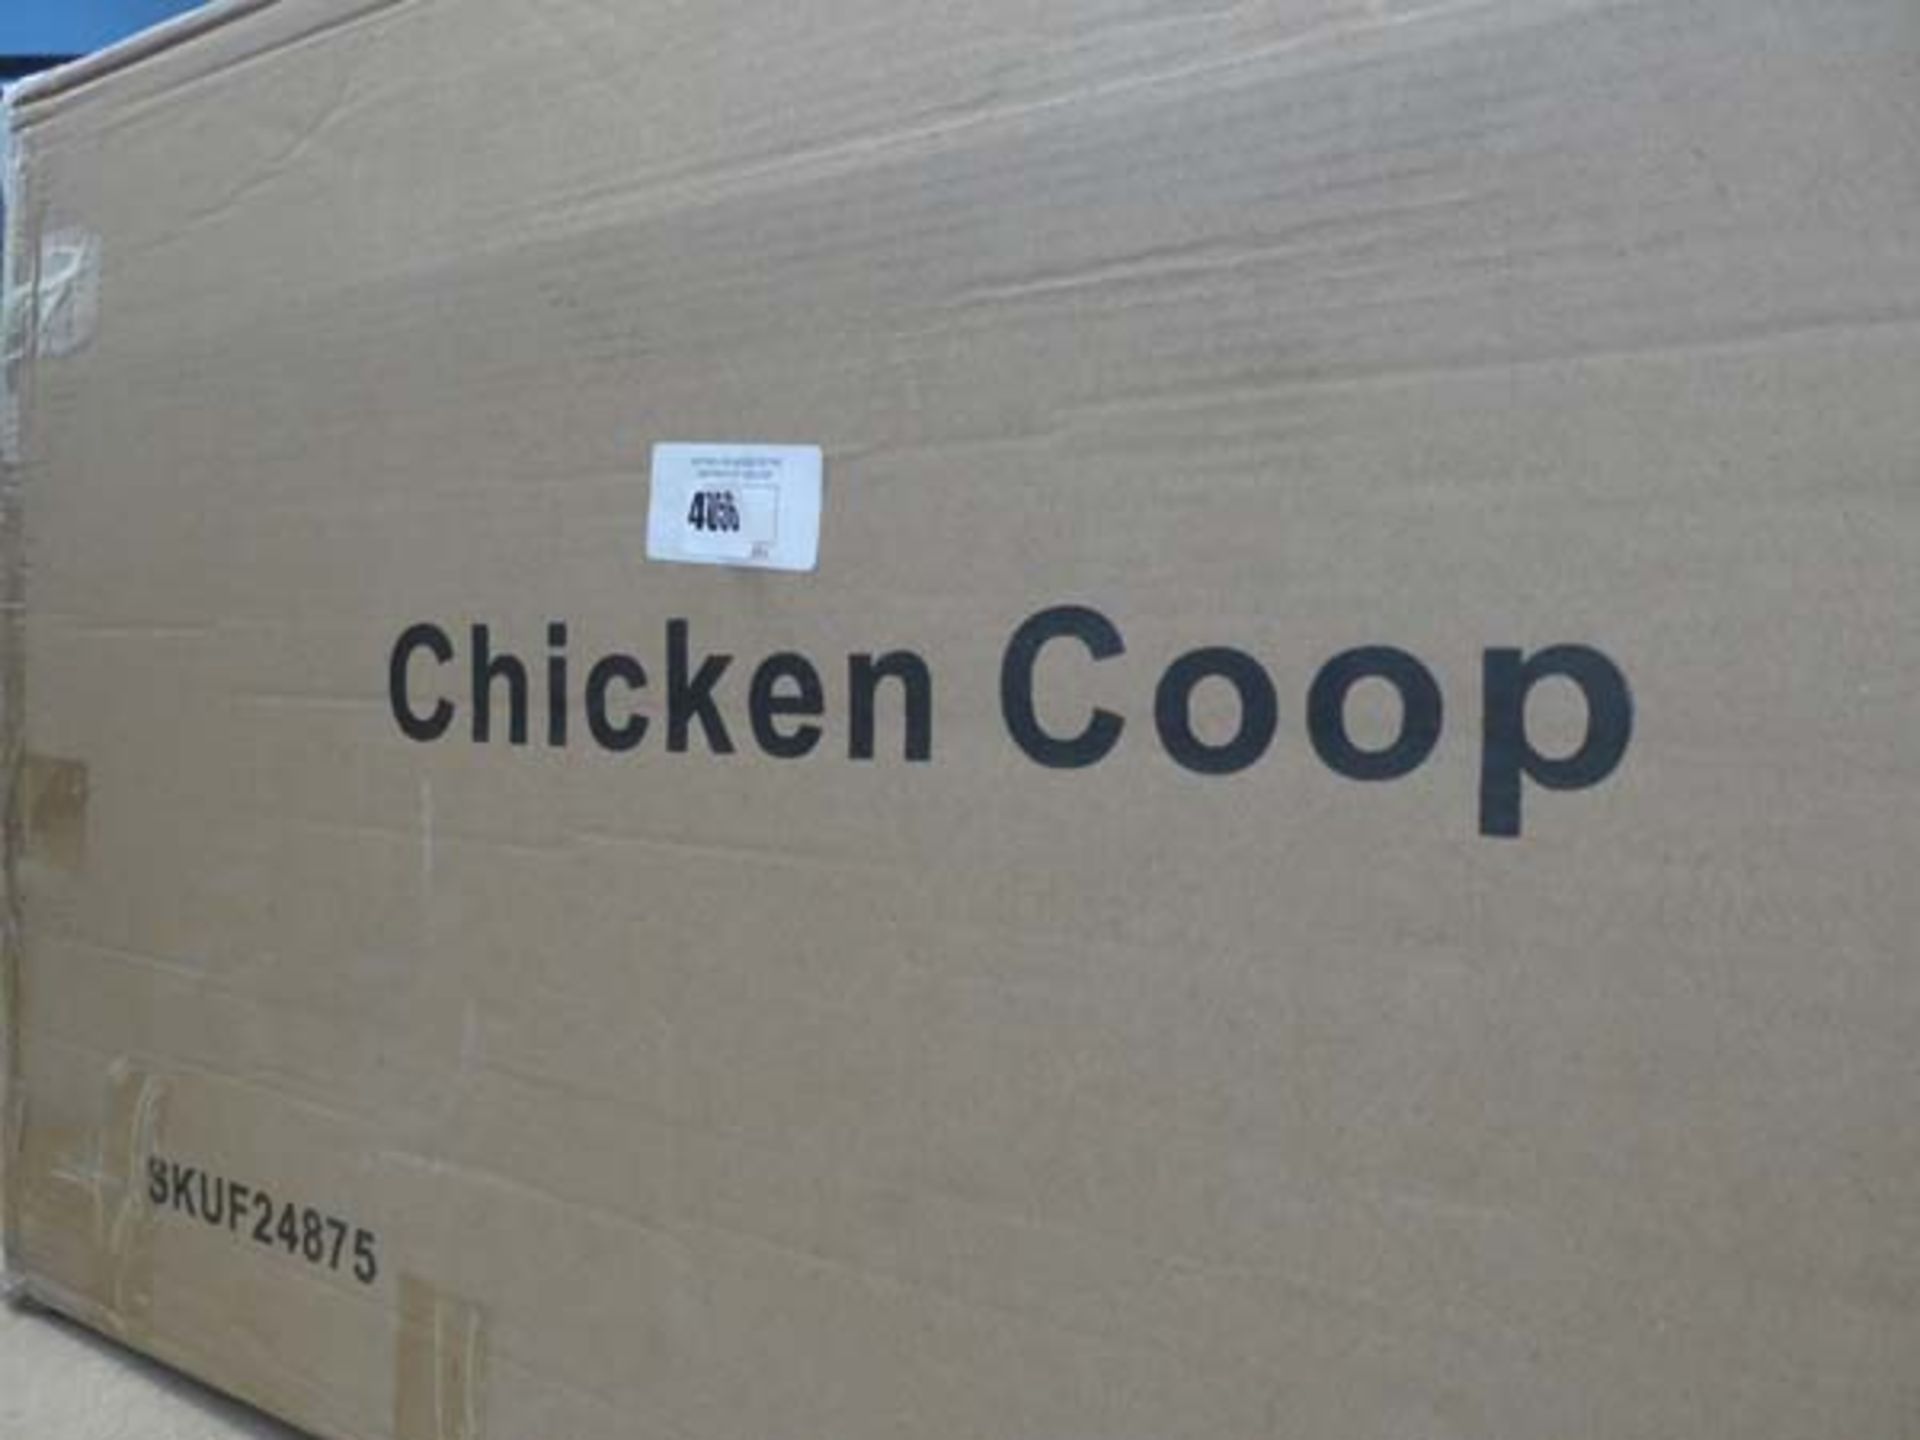 Boxed chicken coop